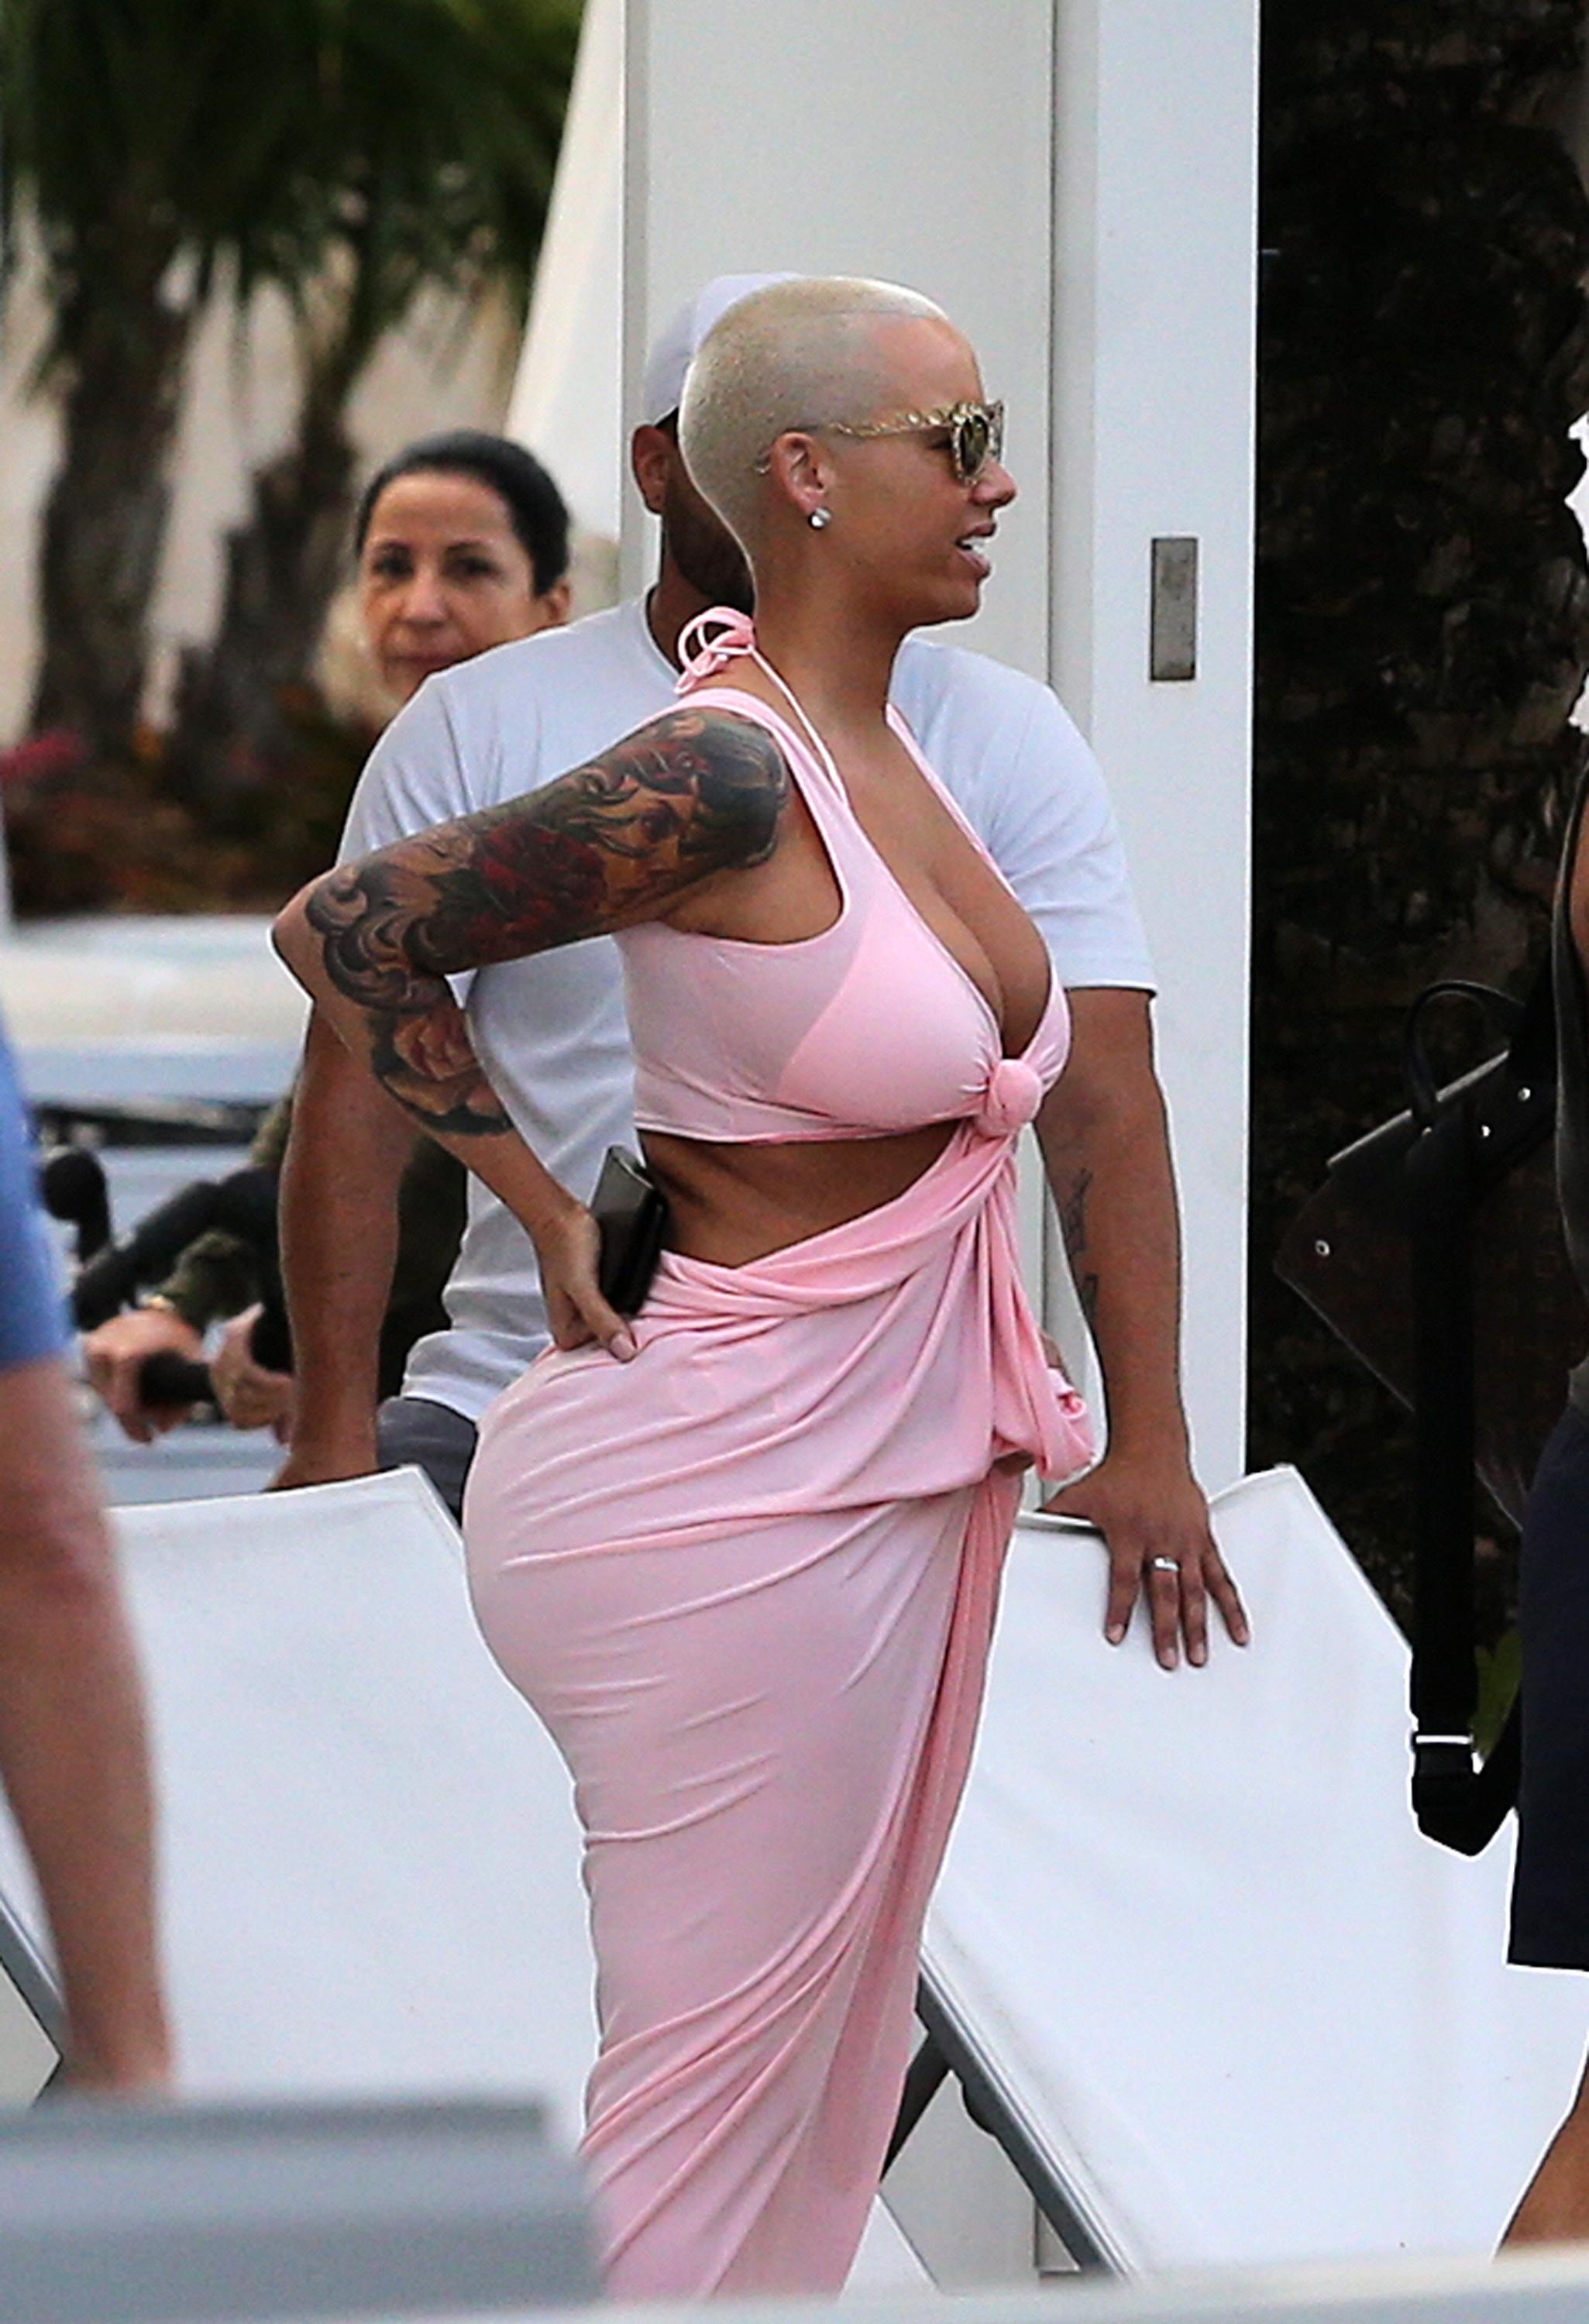 Amber Rose Caught With A Case Of Butt Fakery? See Her Humiliating